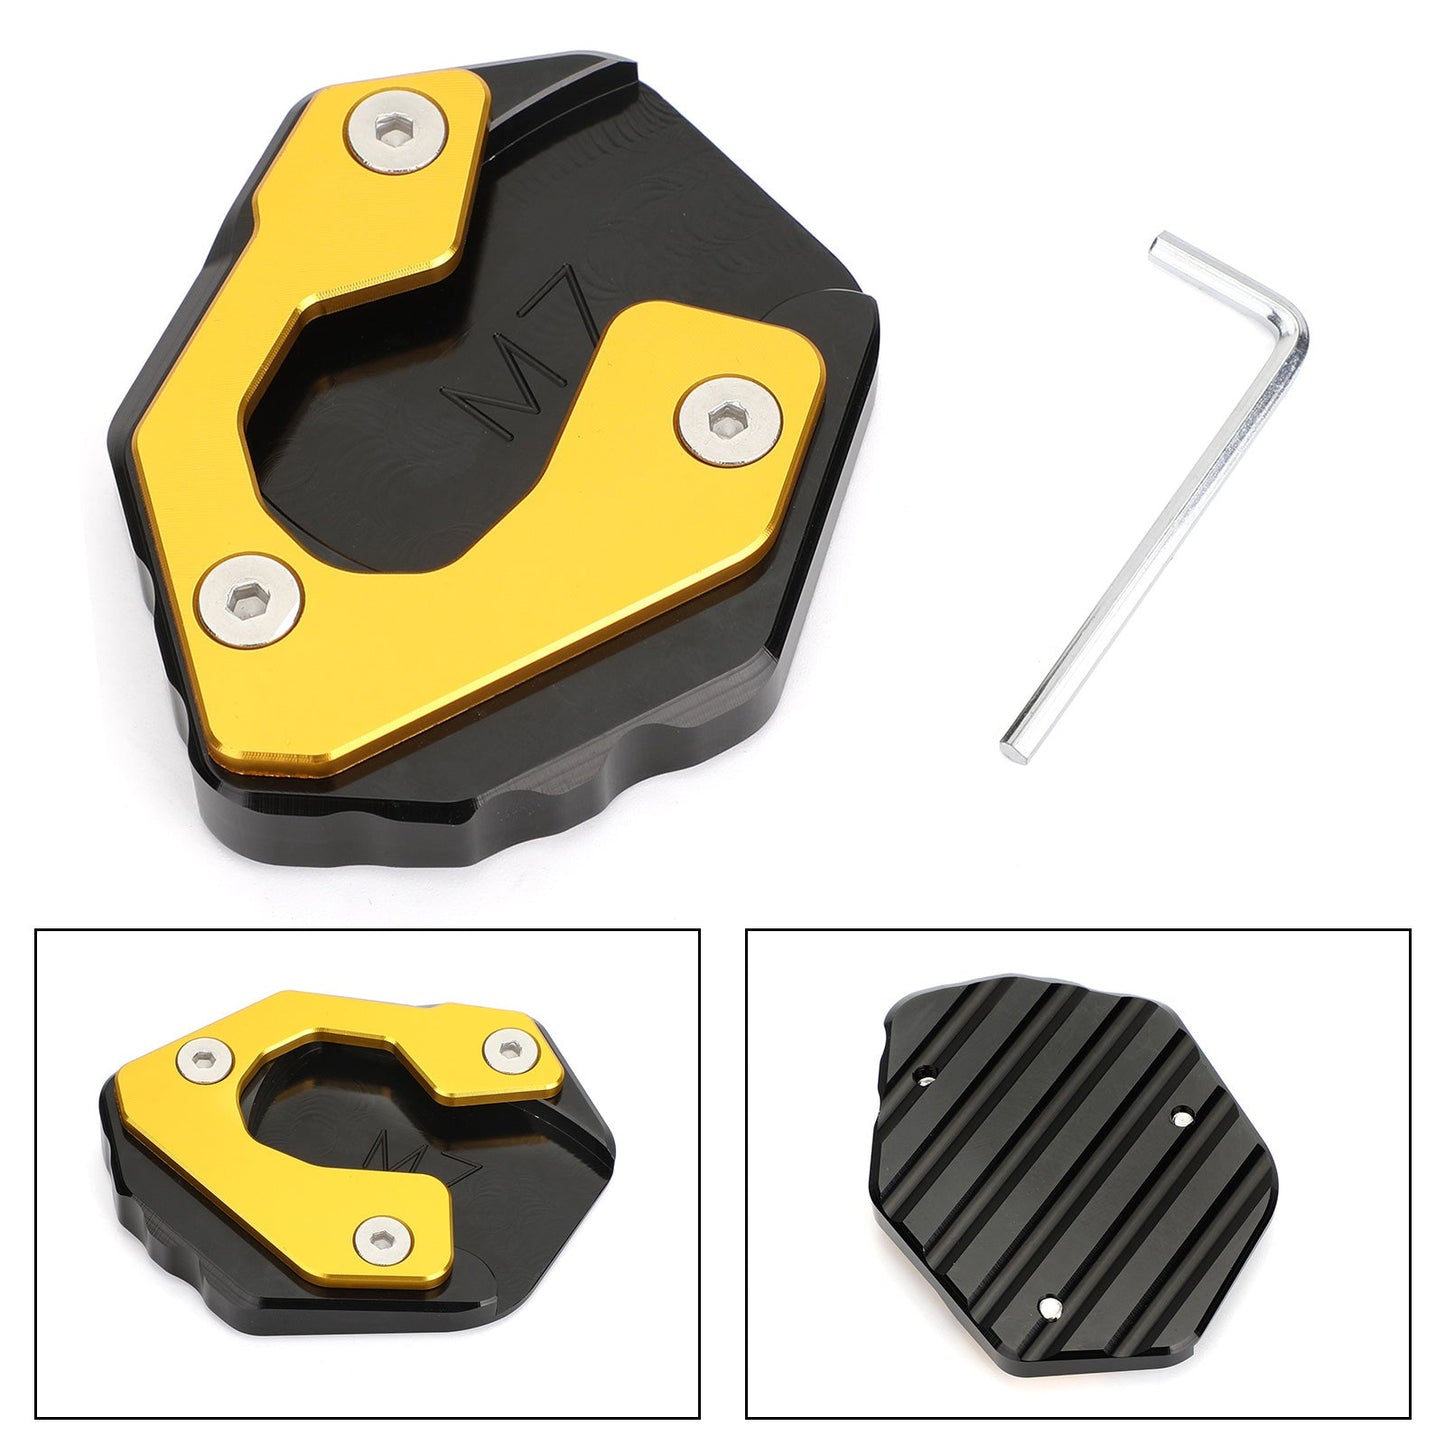 Side Stand Extension Kickstand Enlarger Plate For Yamaha MT-07 FZ-07